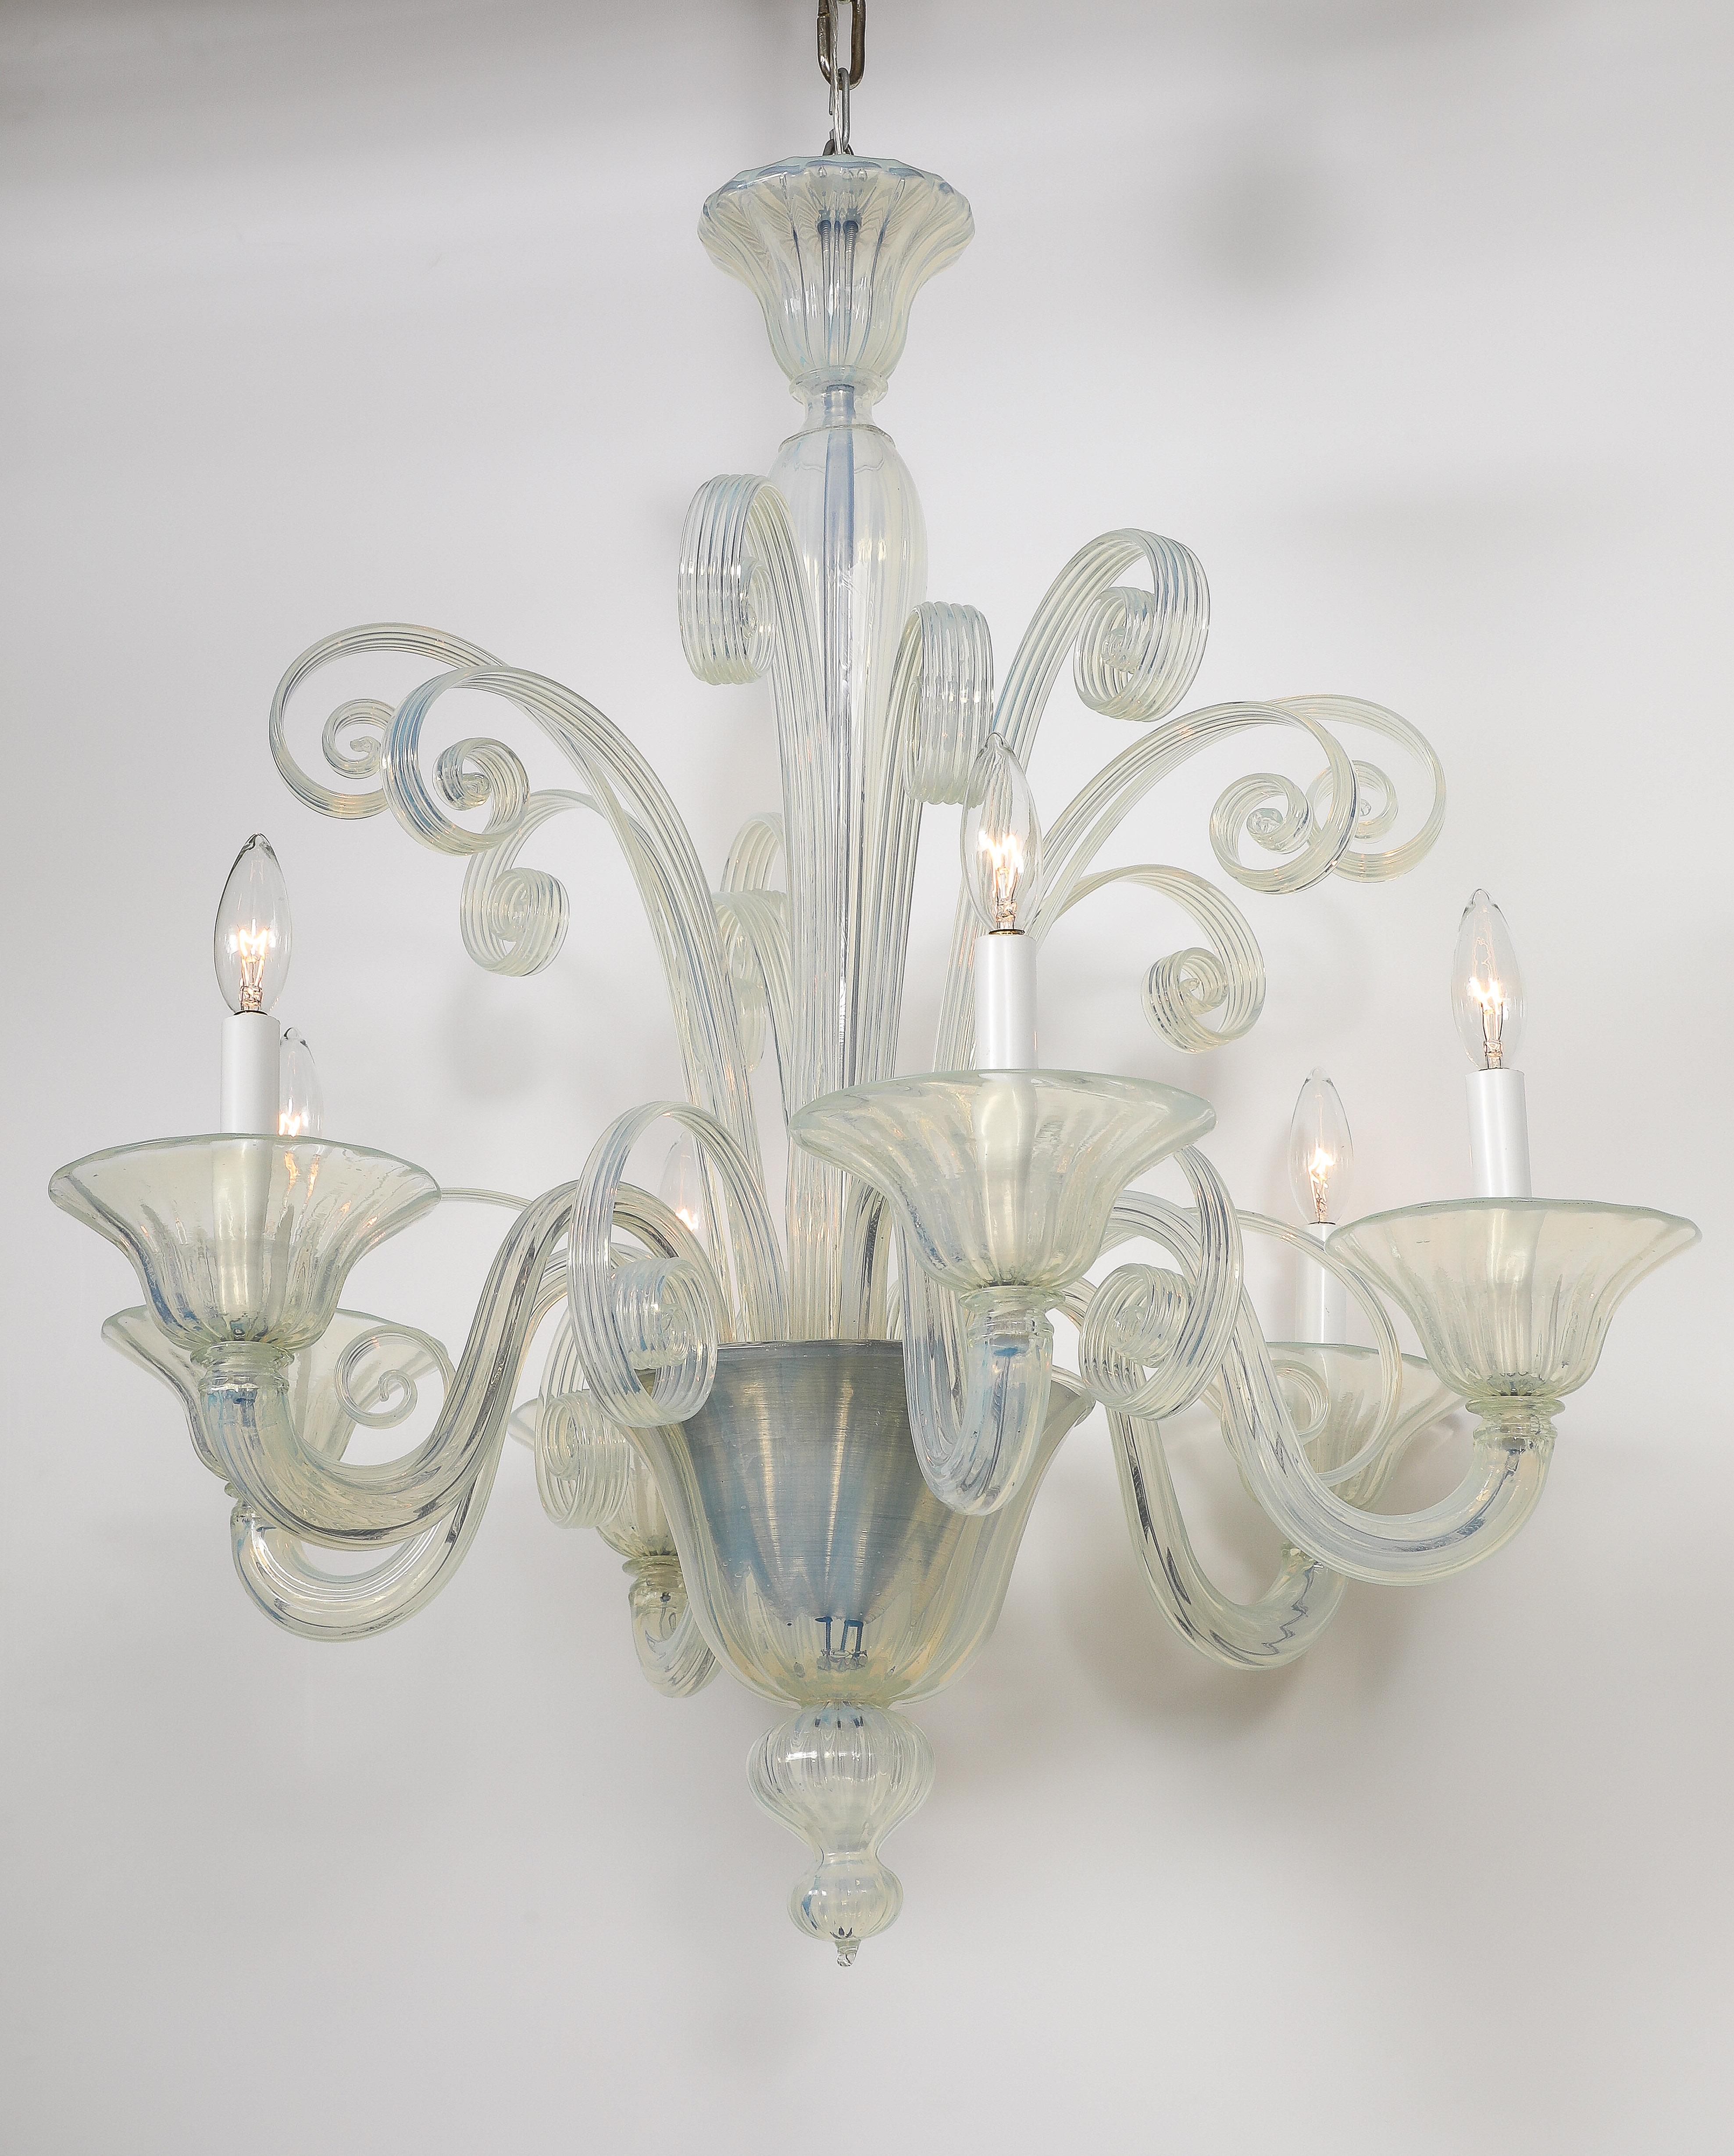 Stunning Mid Century opaline Murano glass chandelier with 6 light sources and fanciful curled glass stylized ribbons. Rewired for use in 110v locations. Uses candelabra type bulbs.